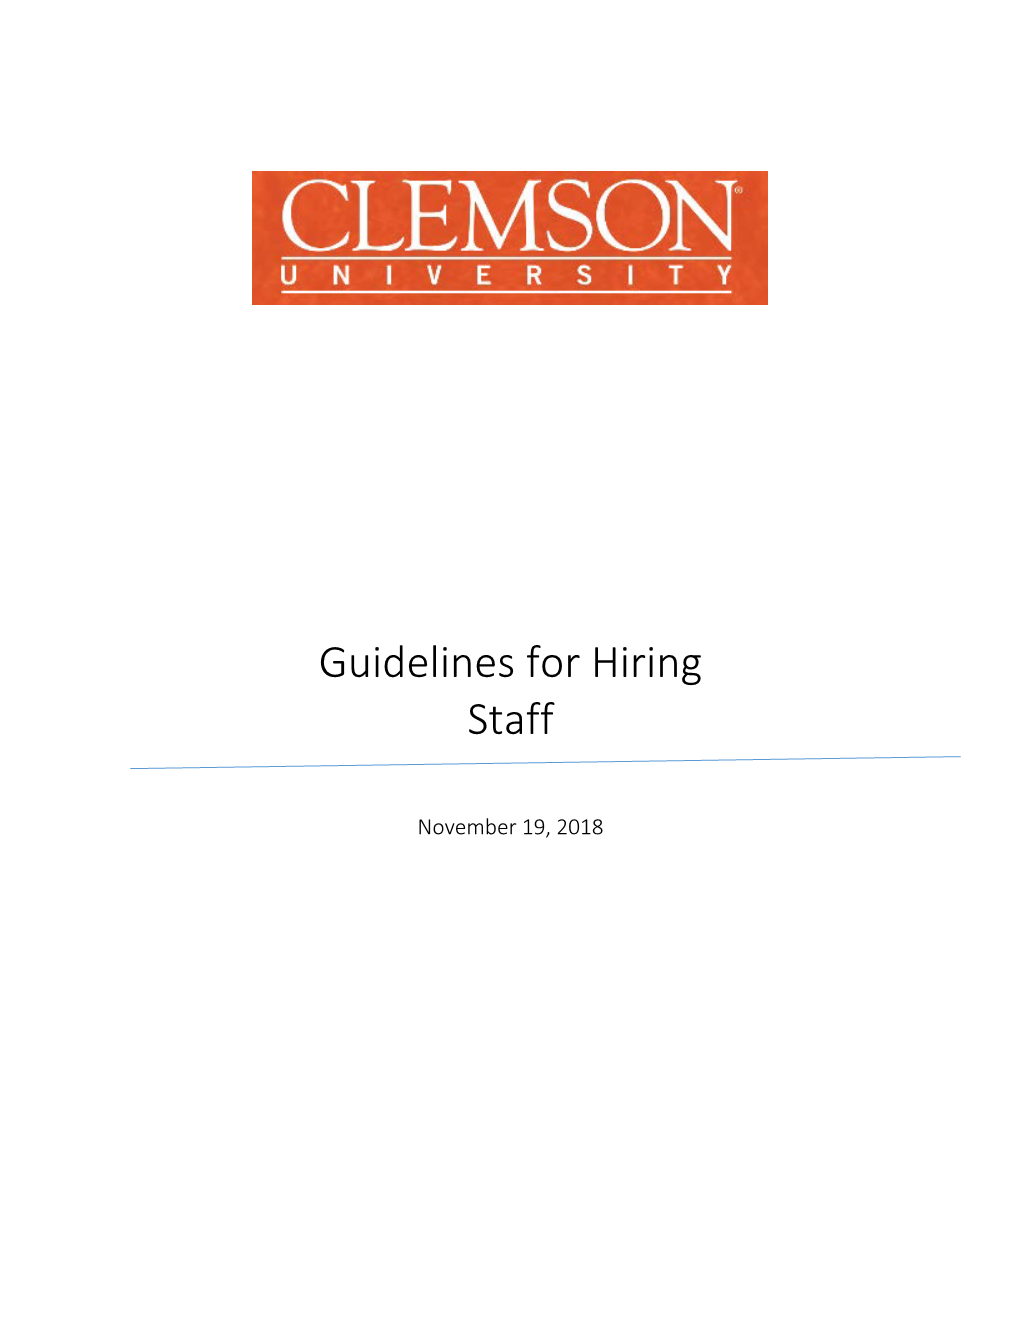 Guidelines for Hiring Staff